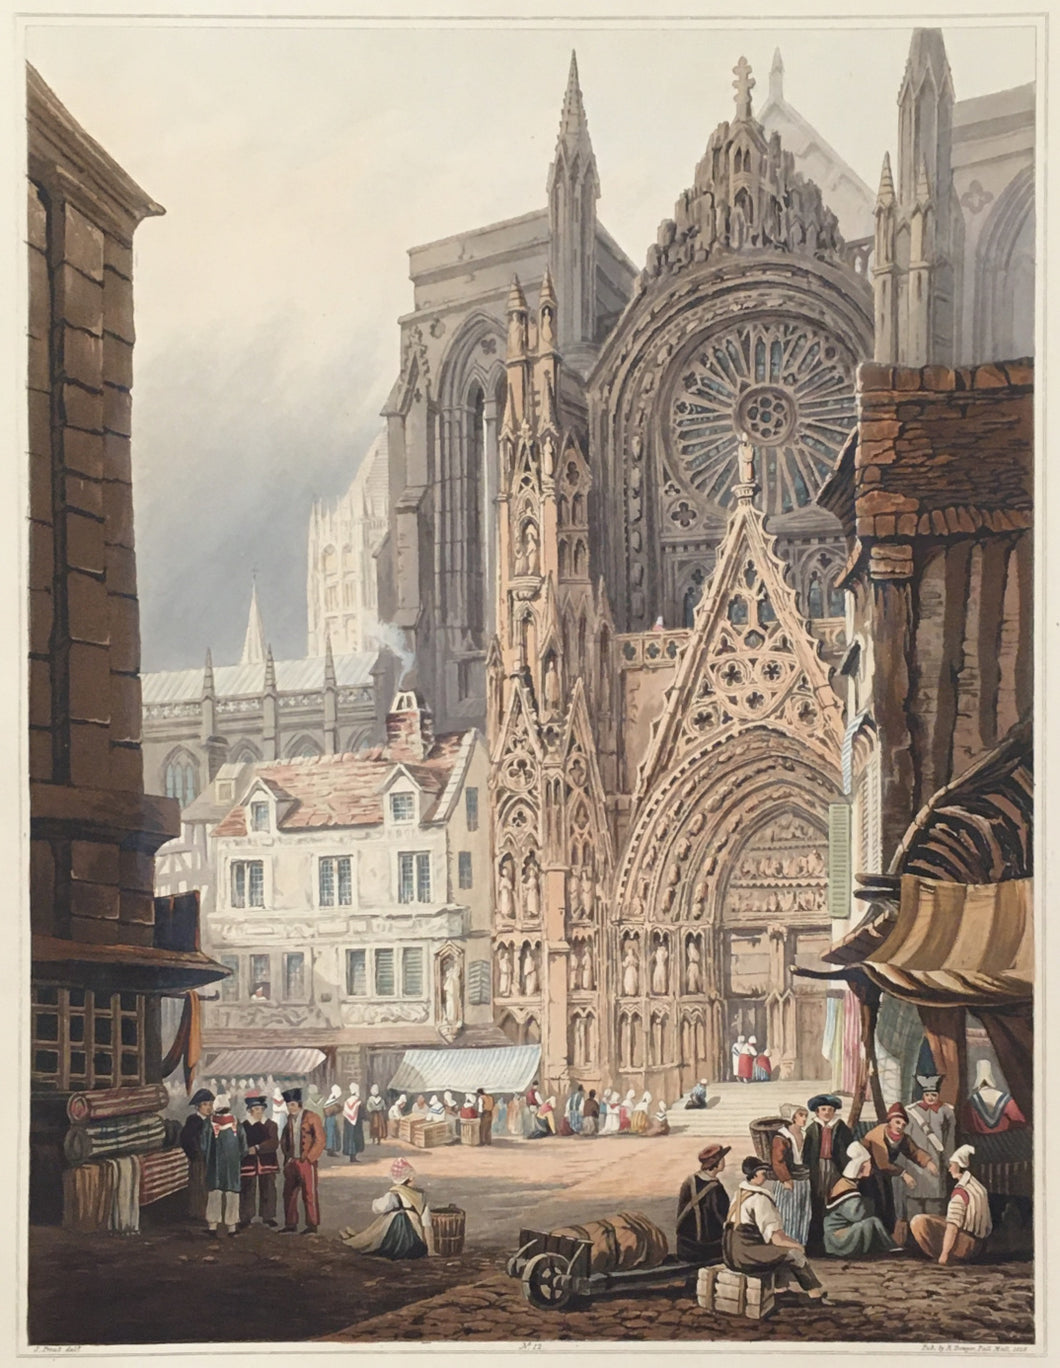 Prout, Samuel “South Entrance to the Cathedral of Rouen in Normandy.” [France] Plate 12.